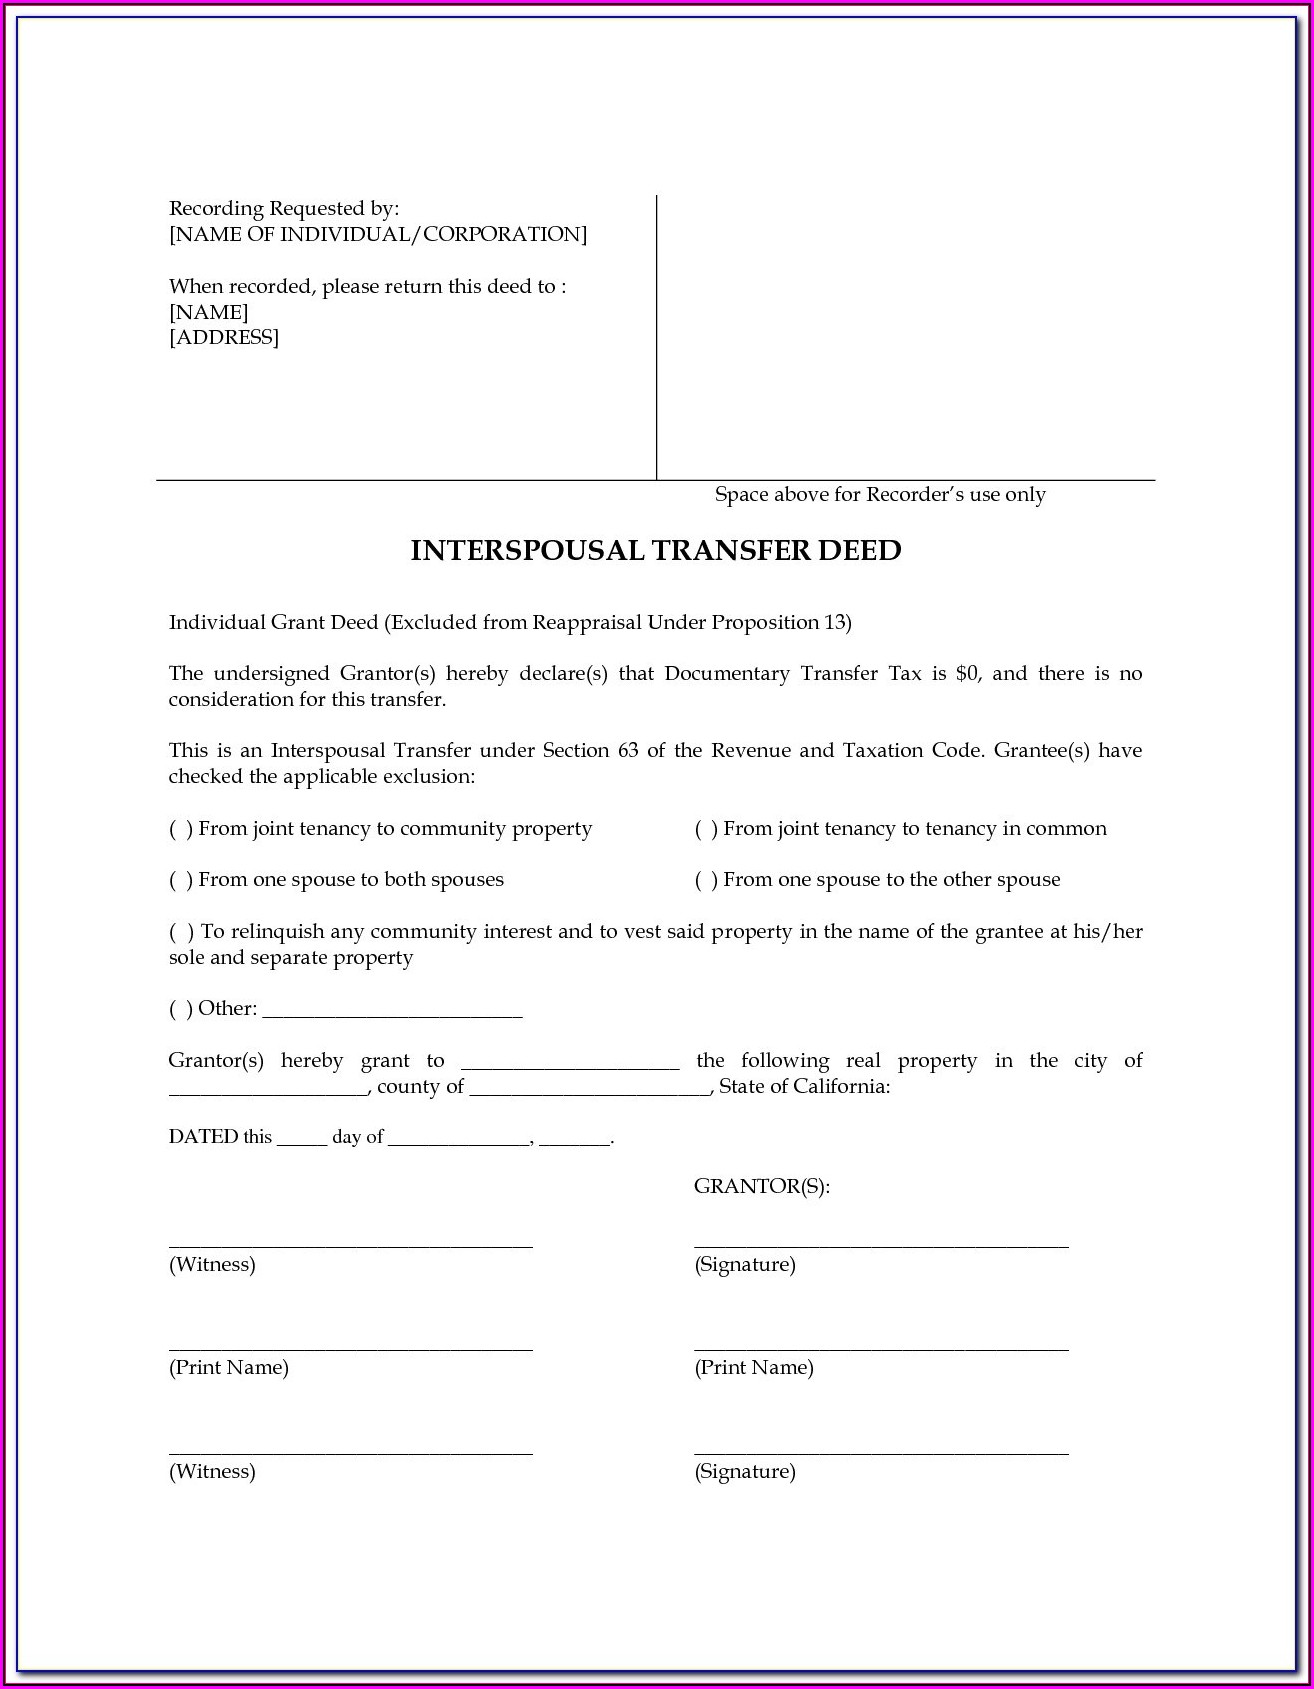 Interspousal Transfer Deed Form Los Angeles County